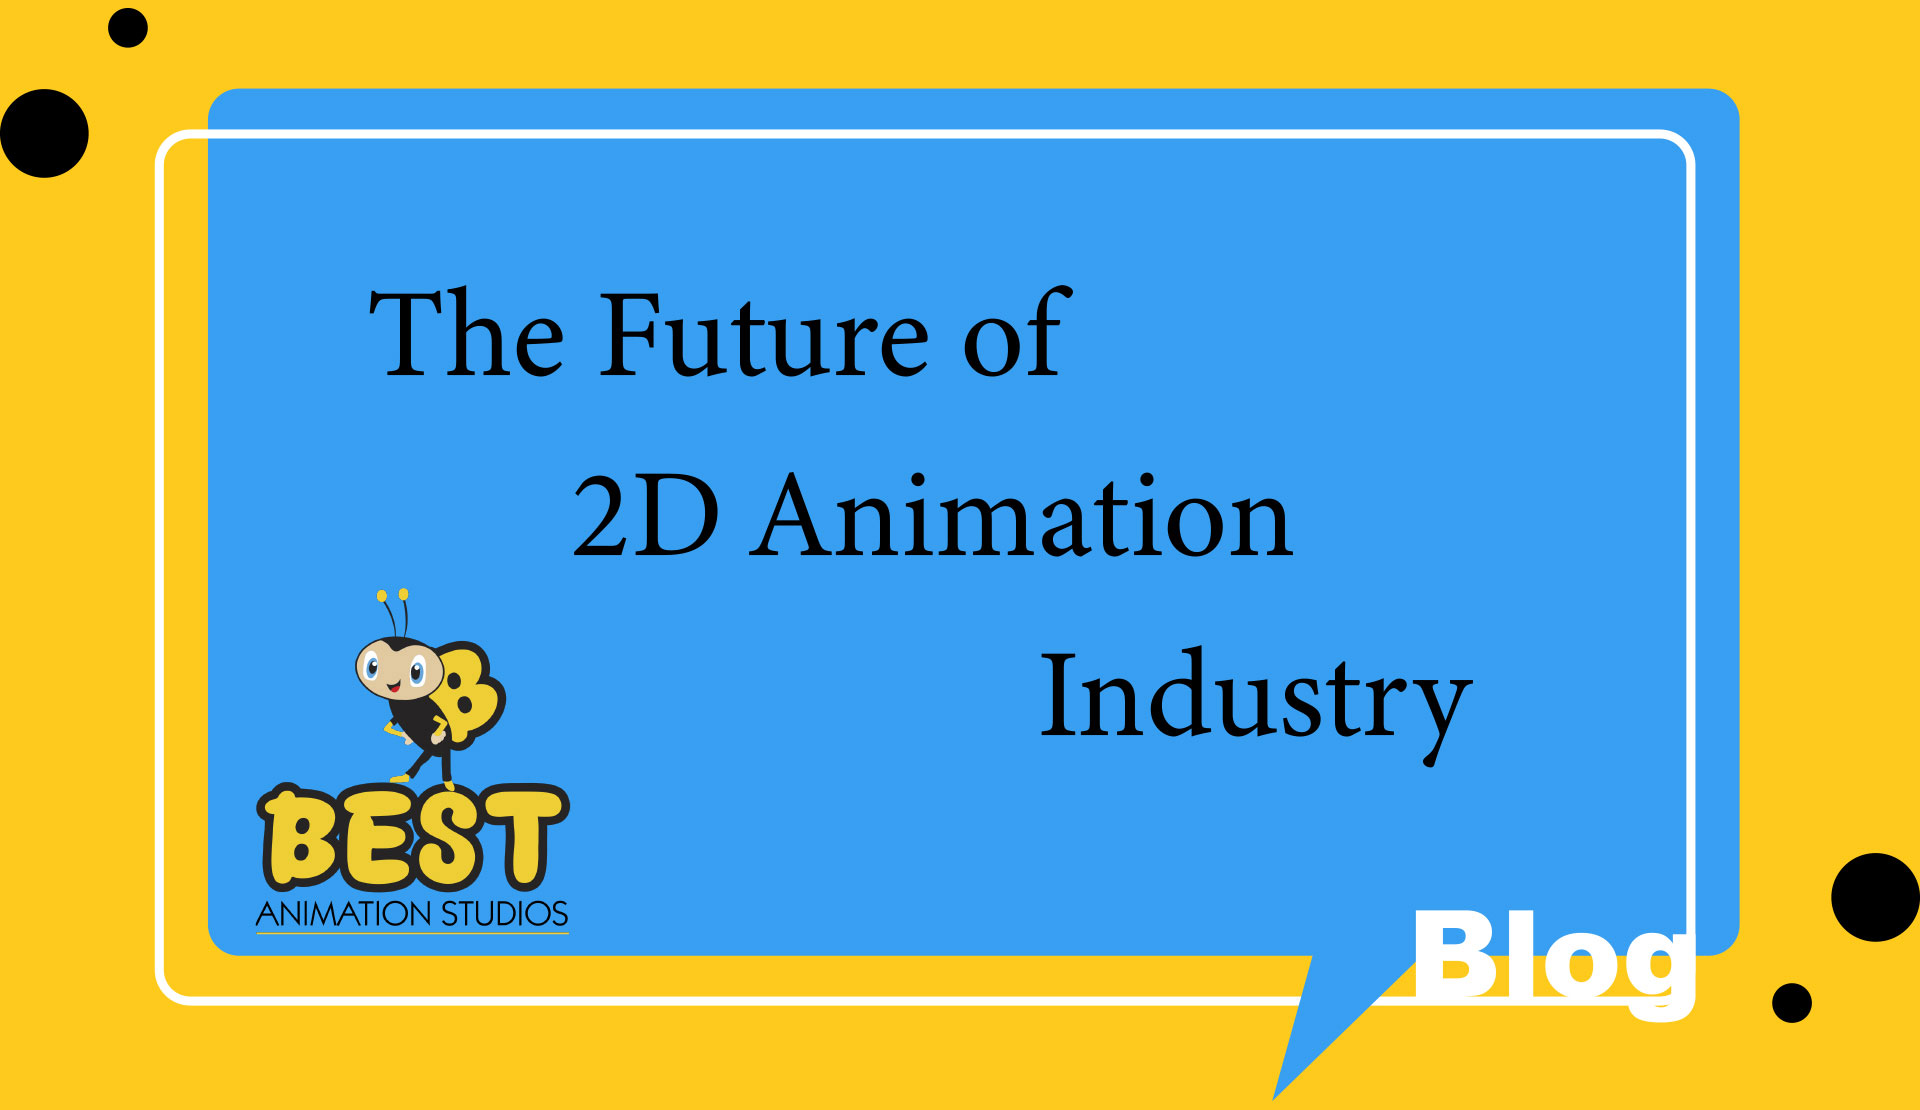 The Future of 2D Animation Industry